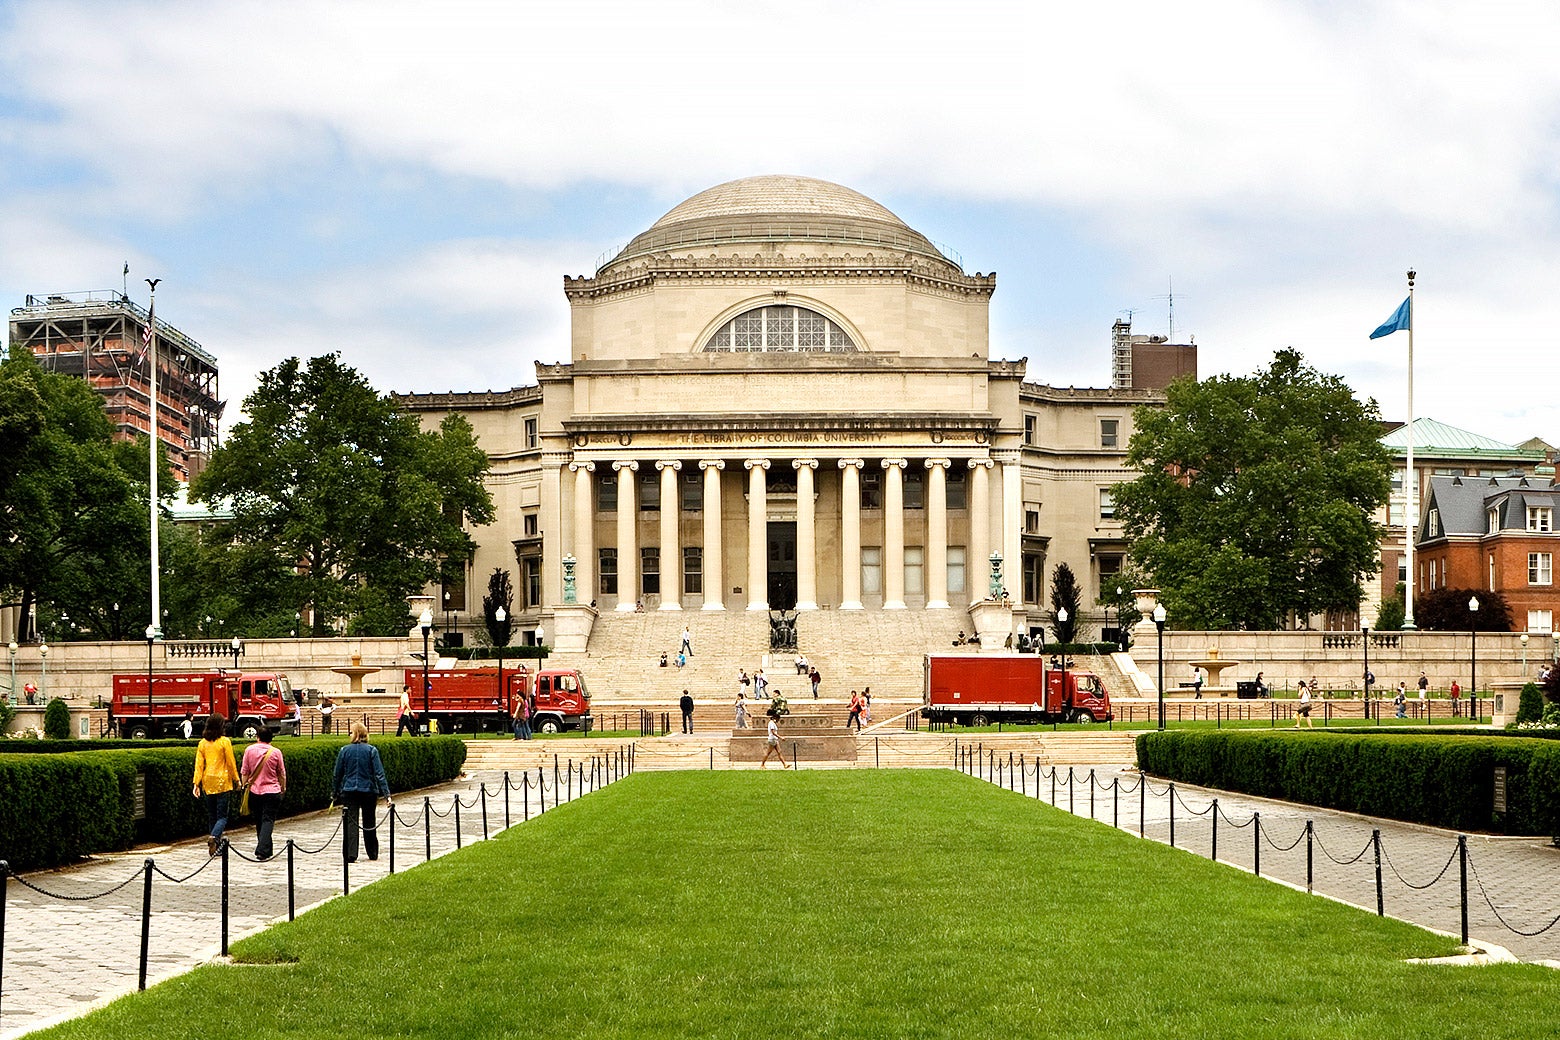 Columbia is the latest university caught in a rankings scandal